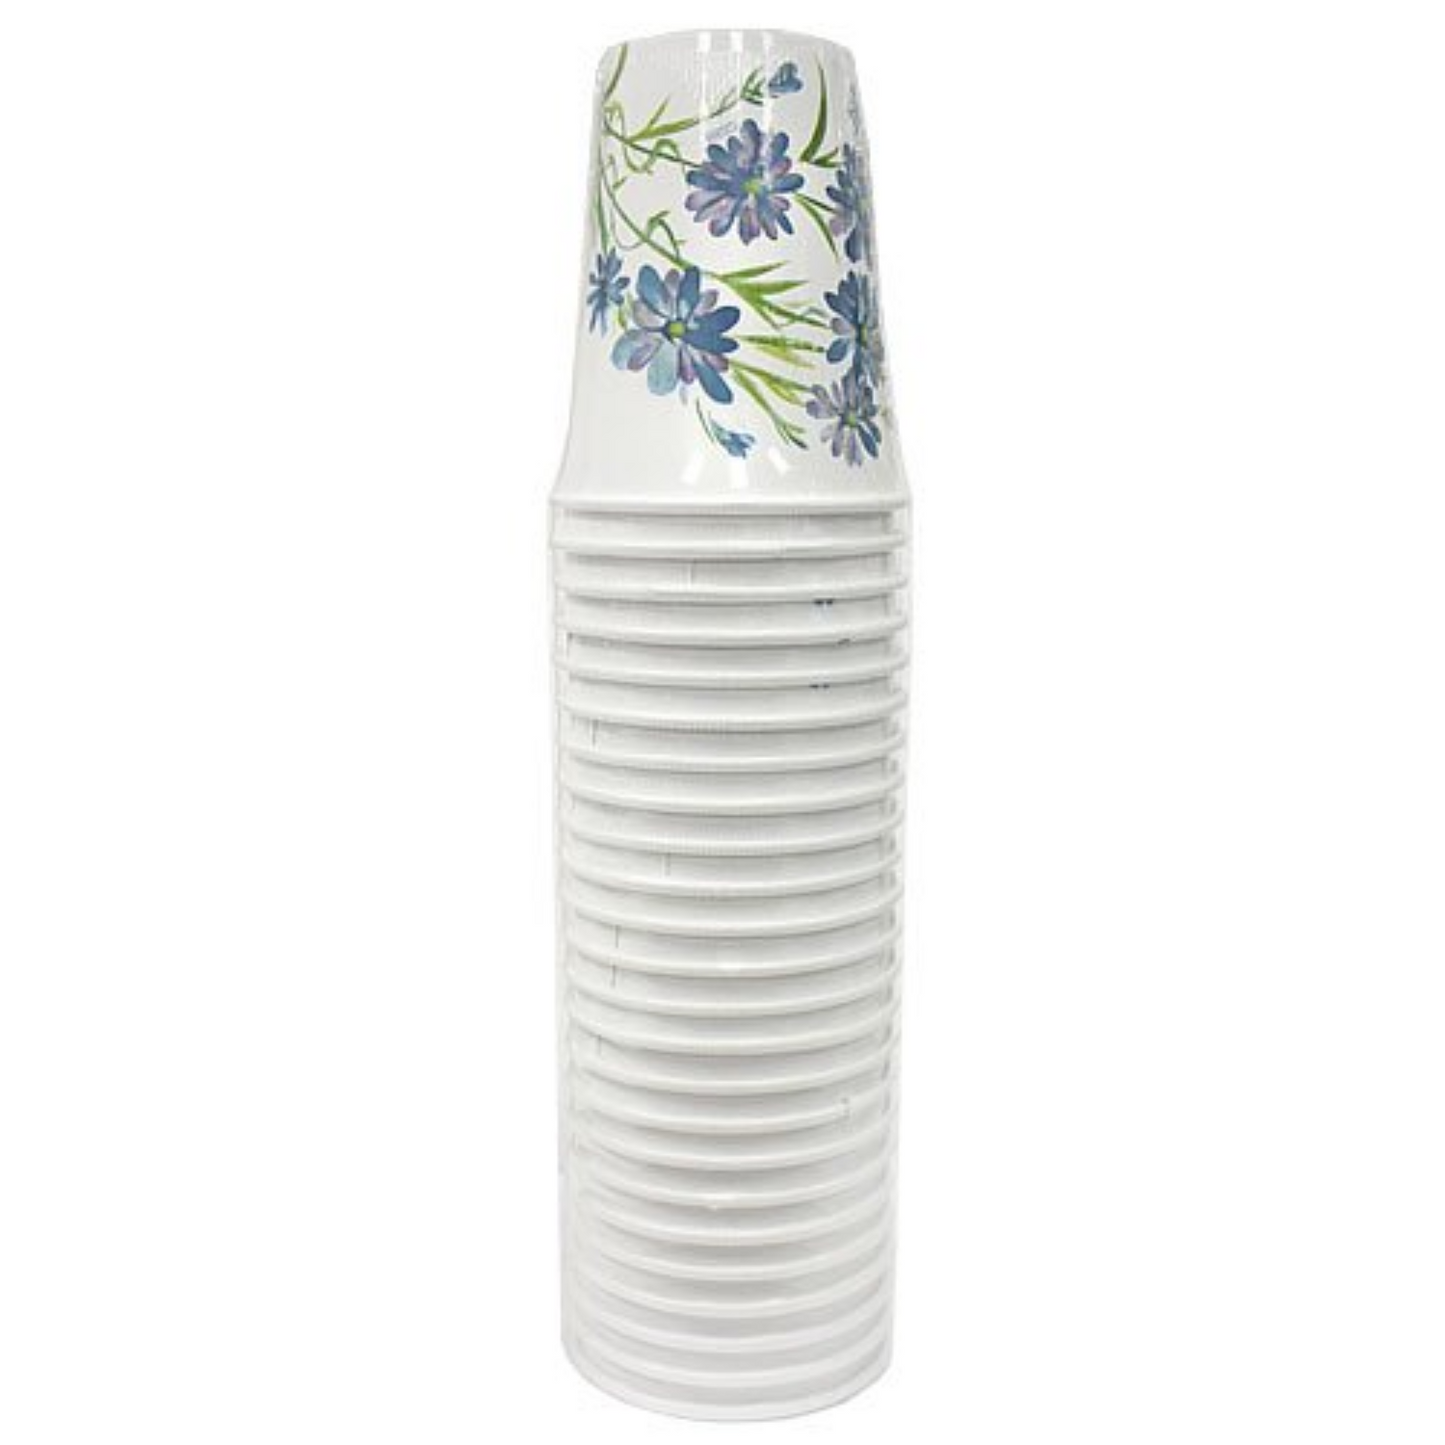 Paper Cup Hot Cold Cup Blue Floral 12 oz  24 Count Paper Cups Nicole Home   